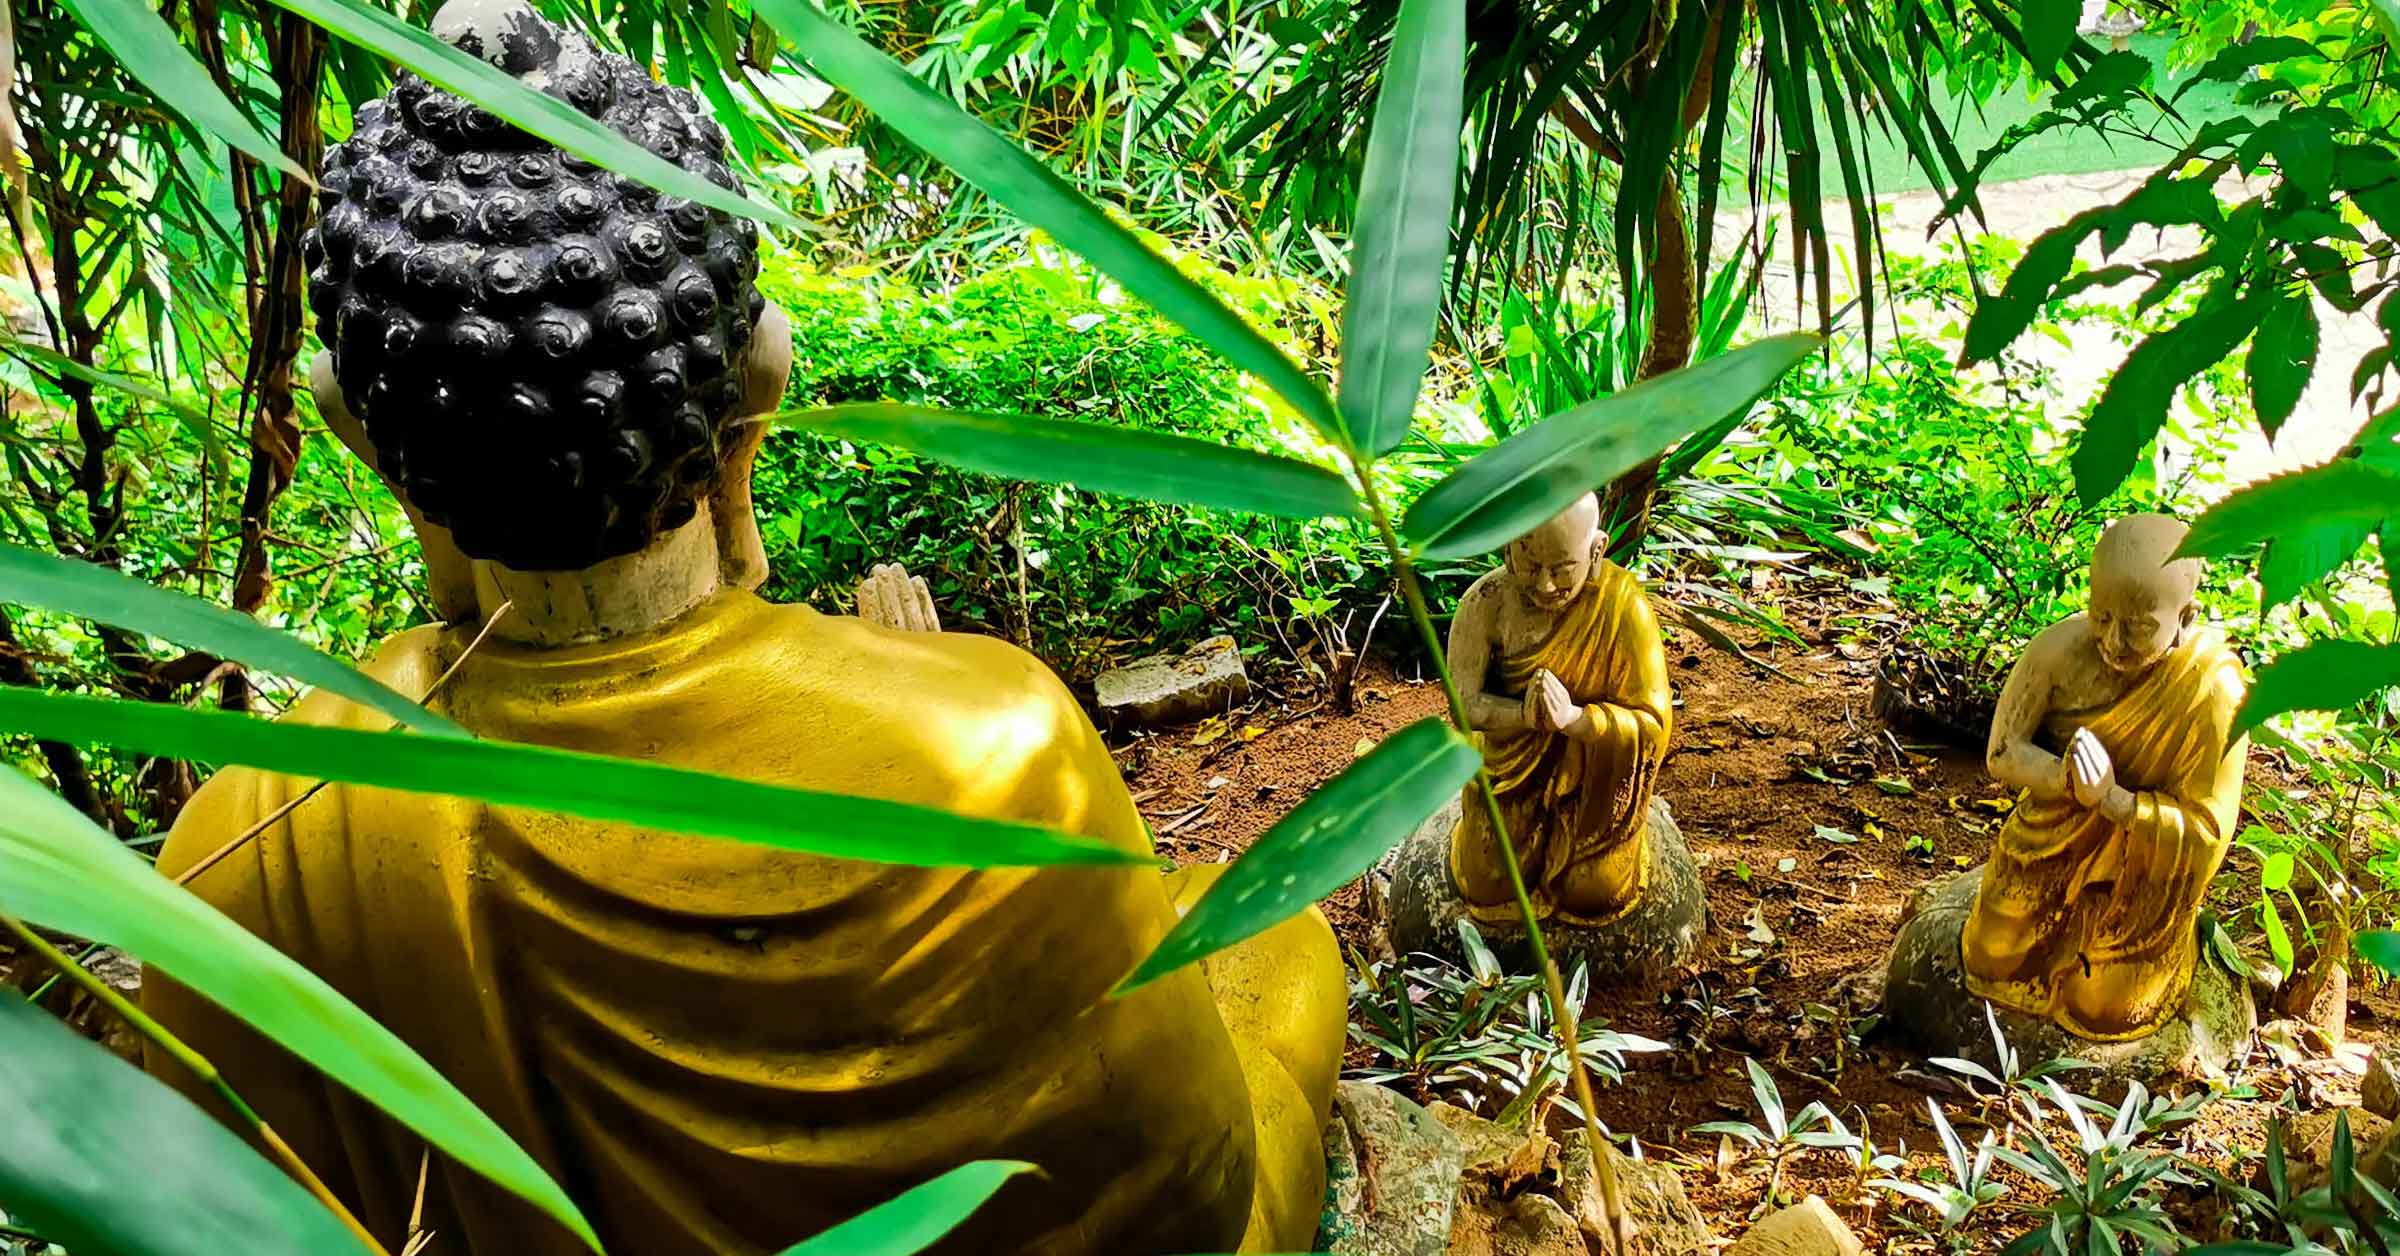 Hiking on Marble Mountains Vietnam - Marble Mountains Monk Statues in the Greenery